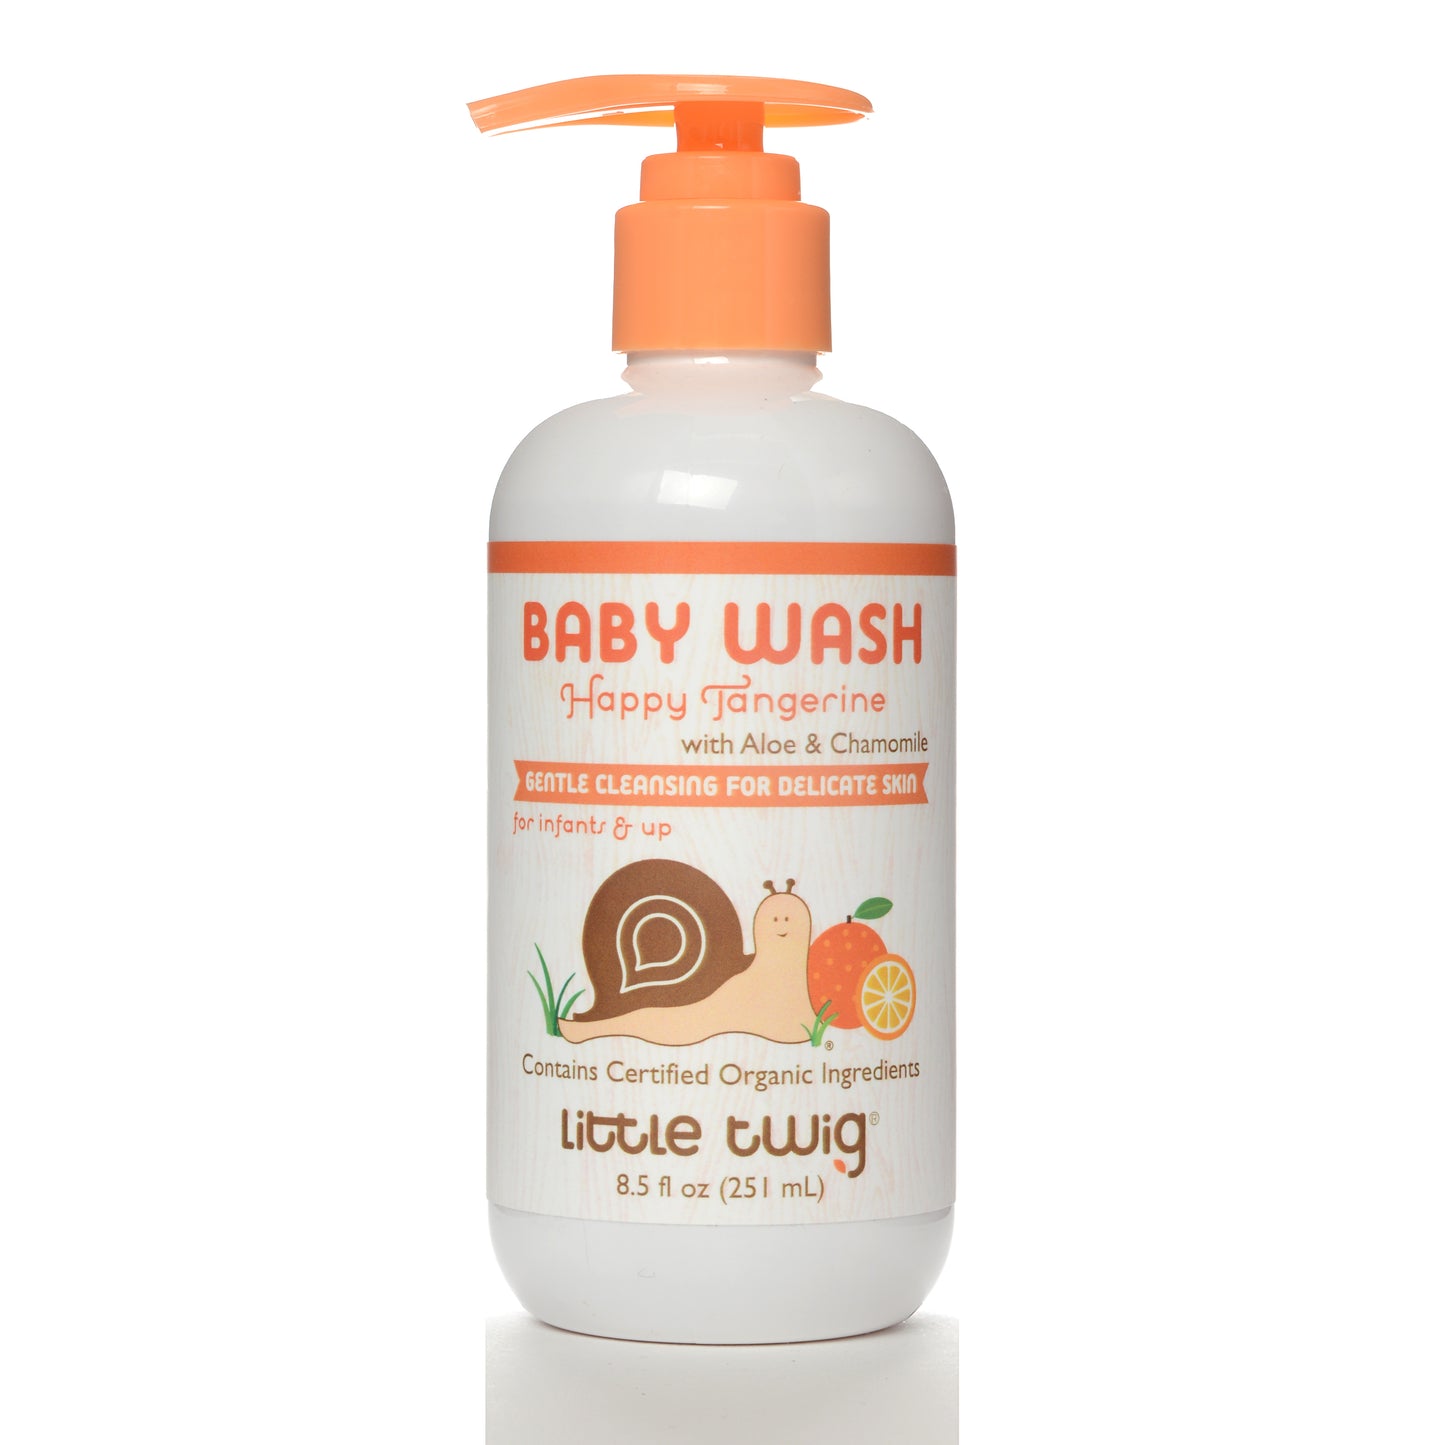 Baby Wash 2-in-1